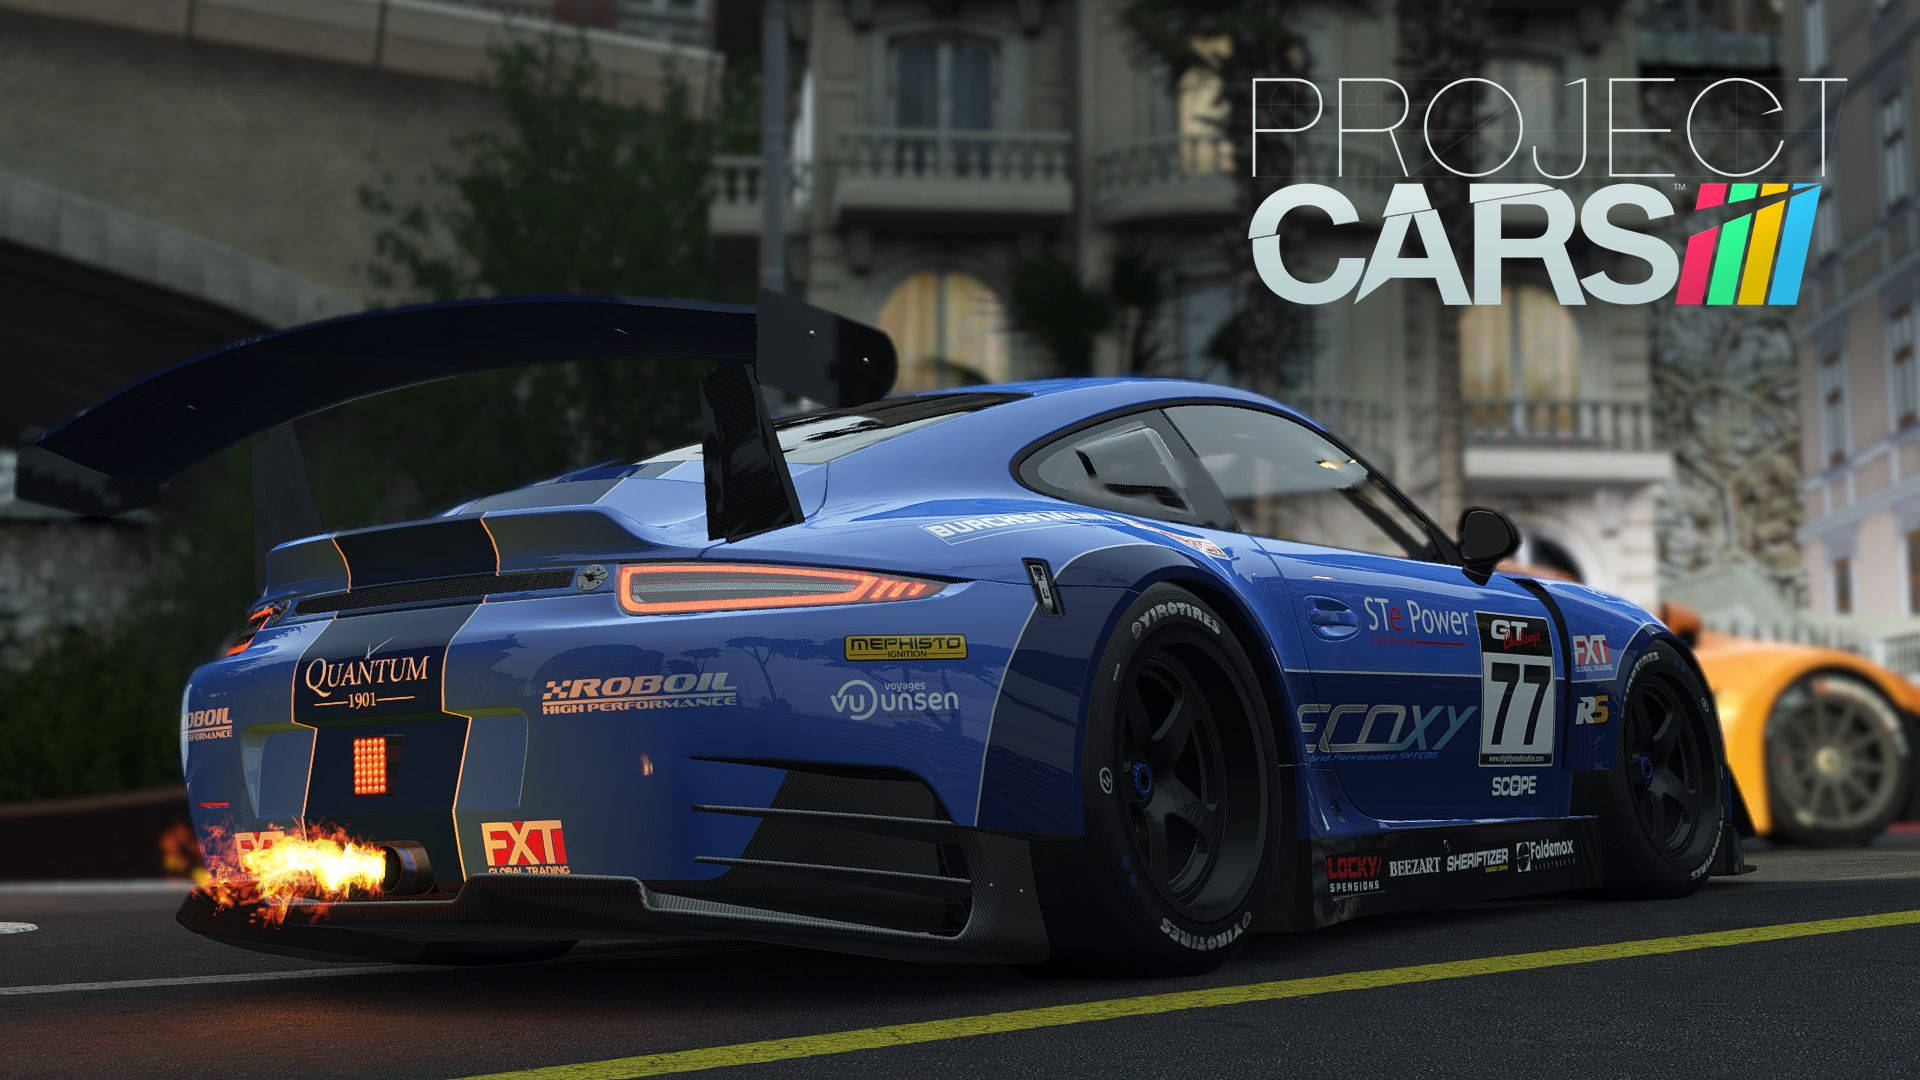 Top 999+ Project Cars 4k Wallpaper Full HD, 4K✅Free to Use